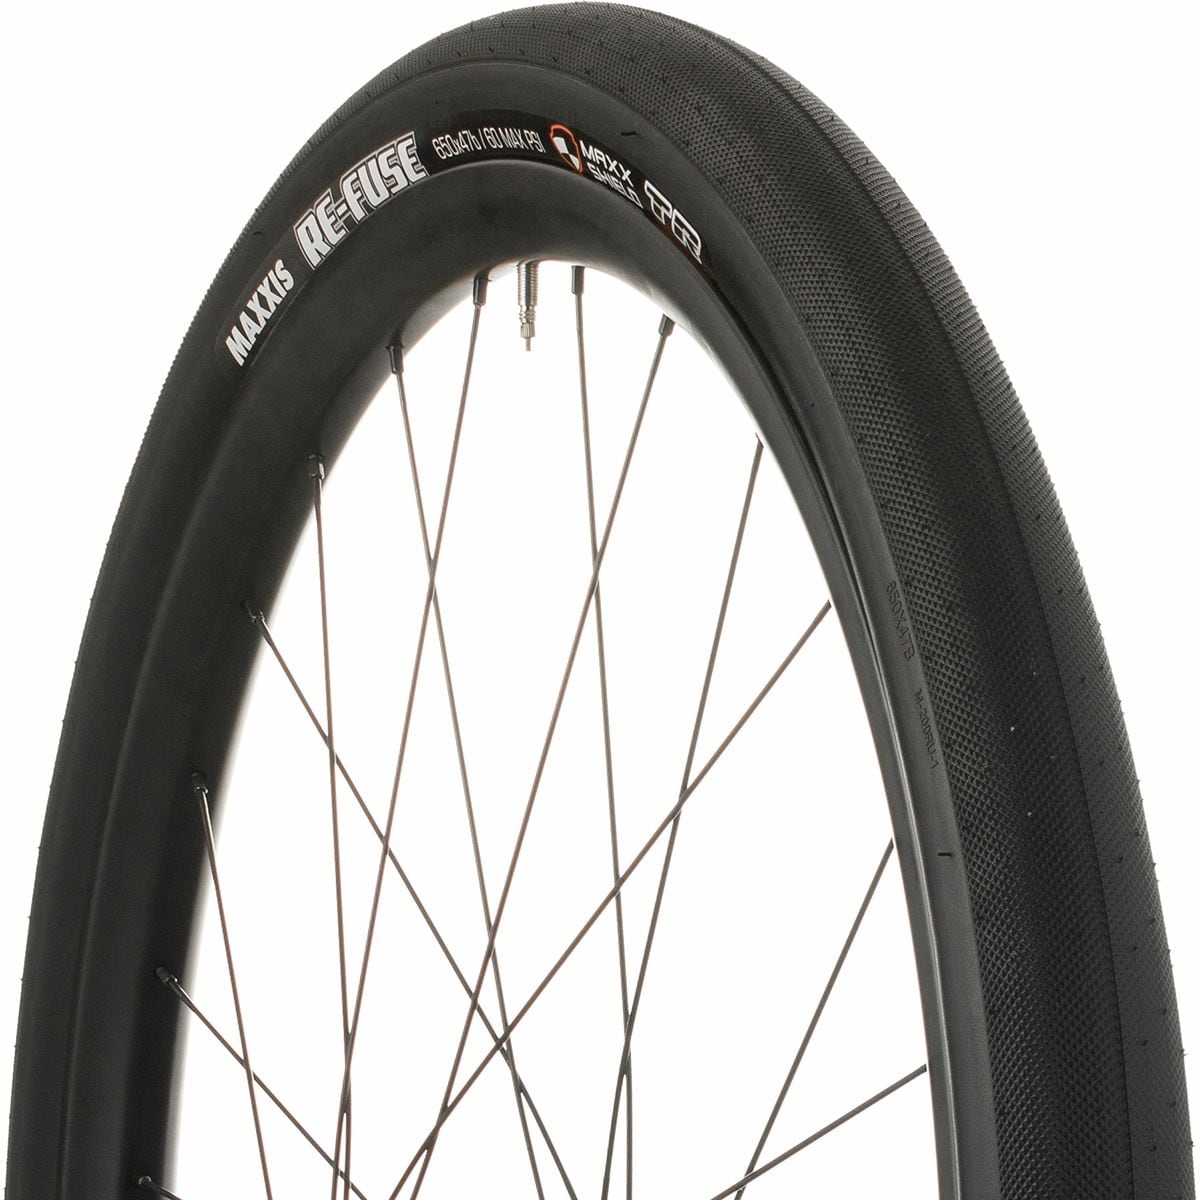 Maxxis Re-Fuse 650b Tubeless Tire